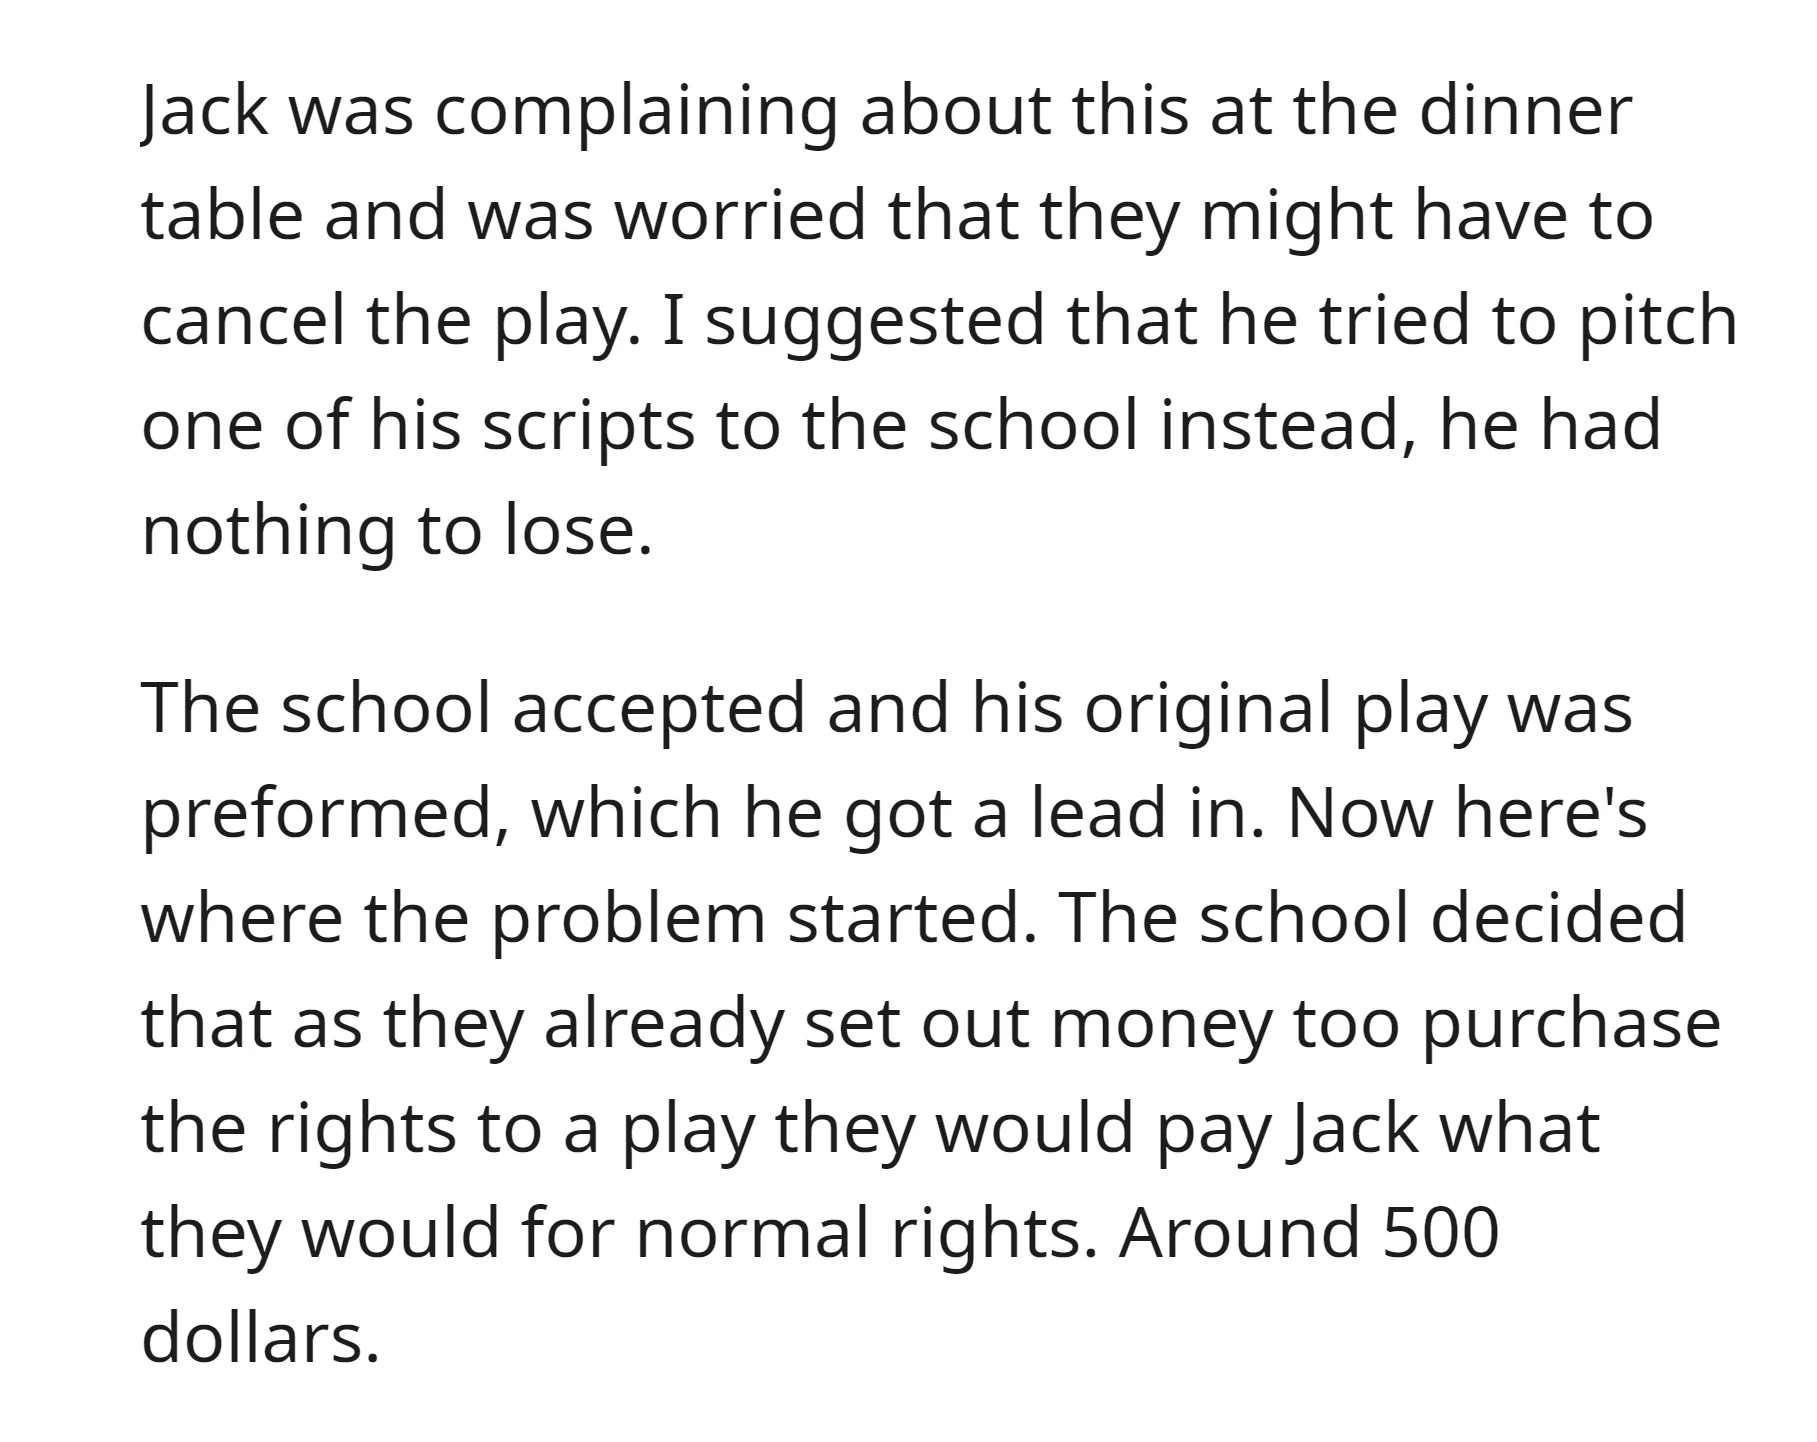 The school paid the OP the standard amount for rights